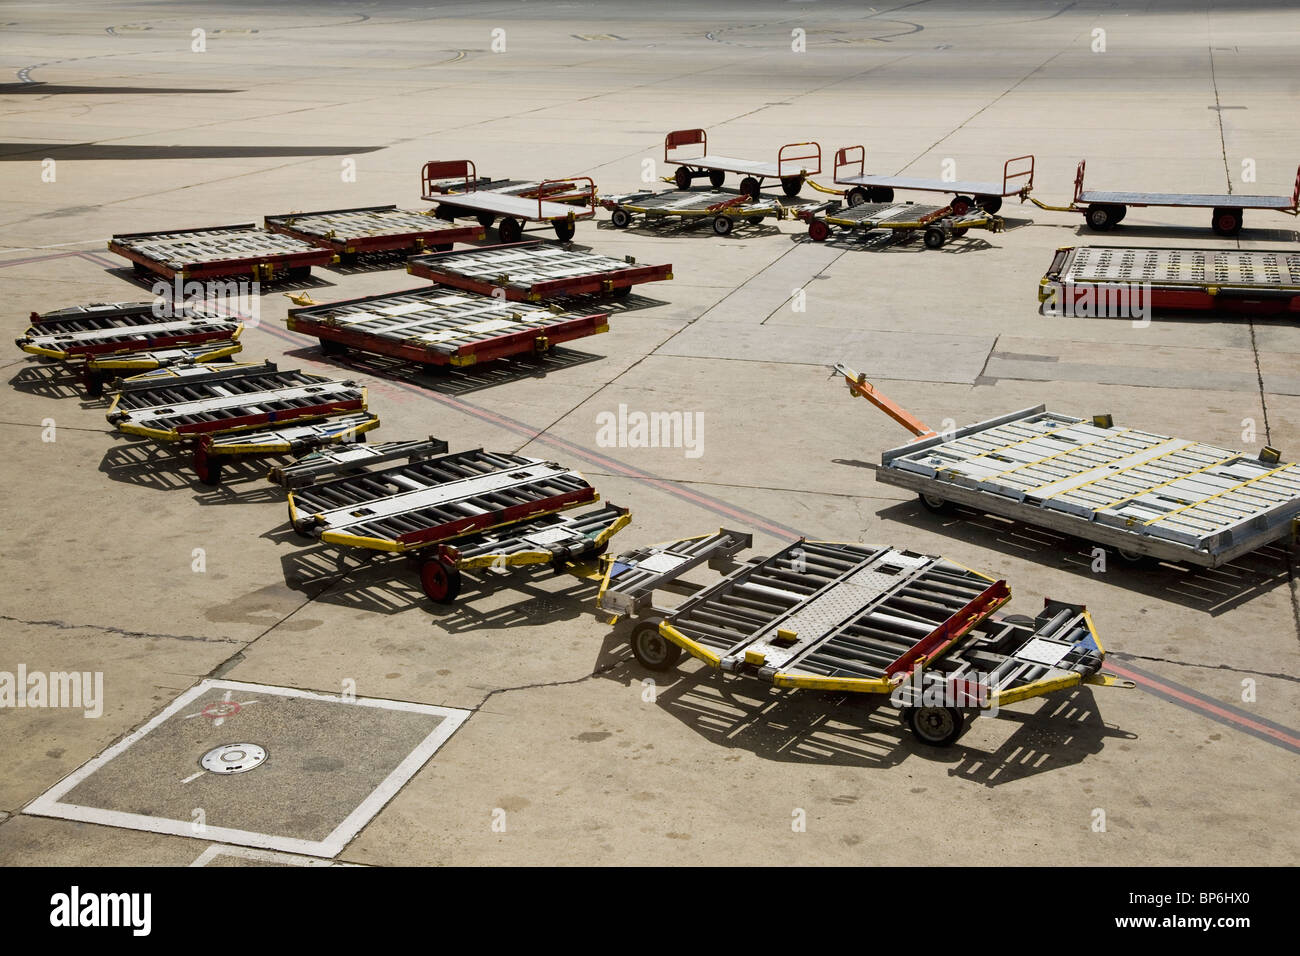 Baggage trailers on an airport tarmac Stock Photo